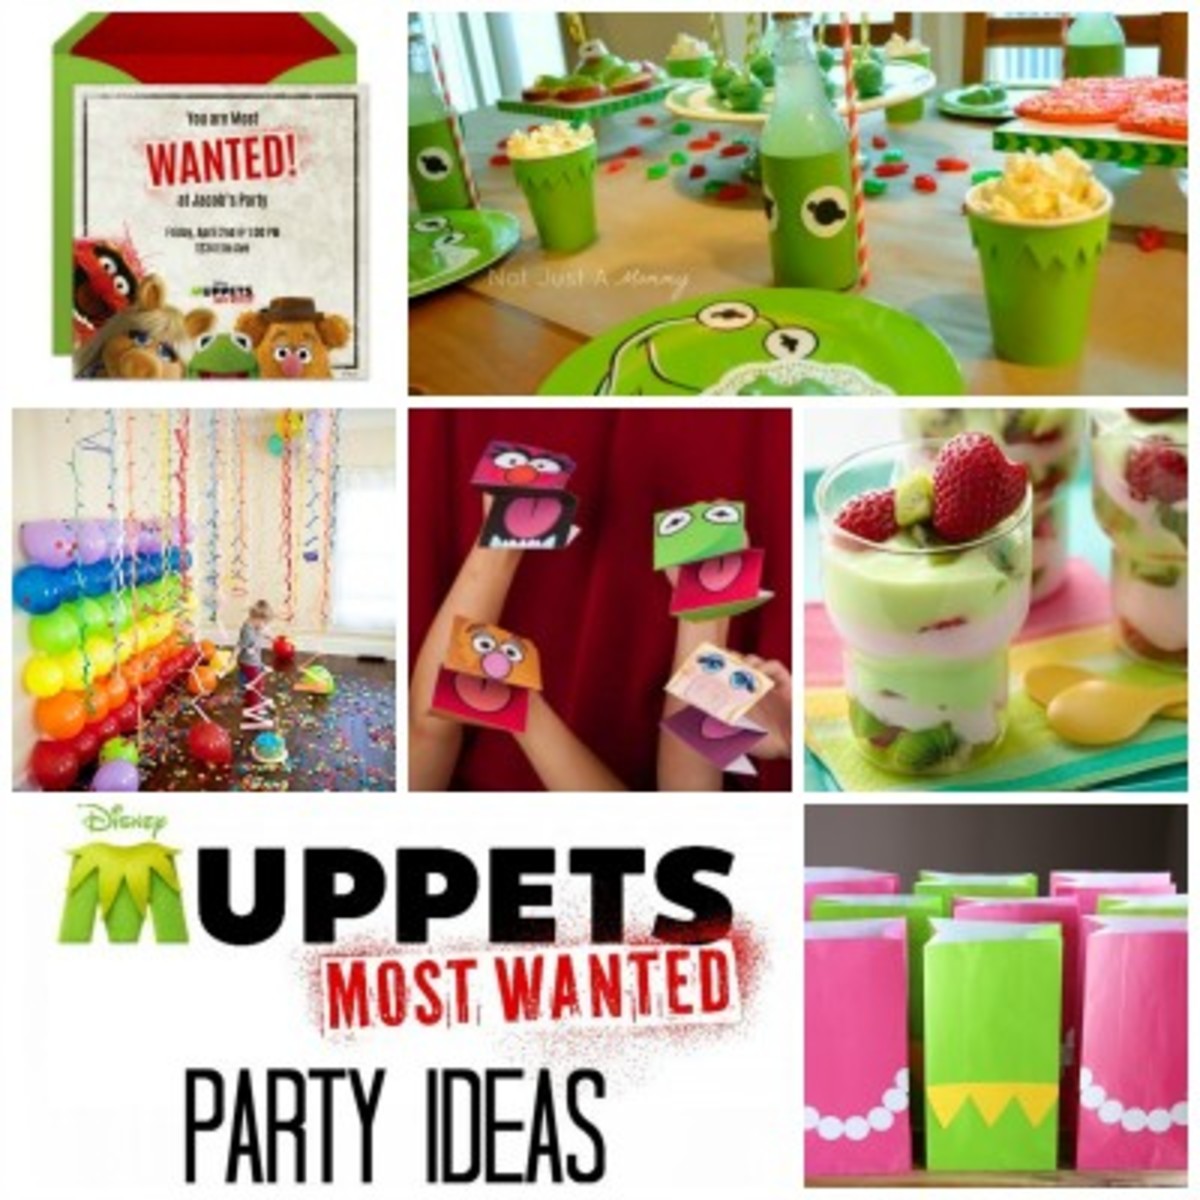 Muppets Most Wanted Party Ideas